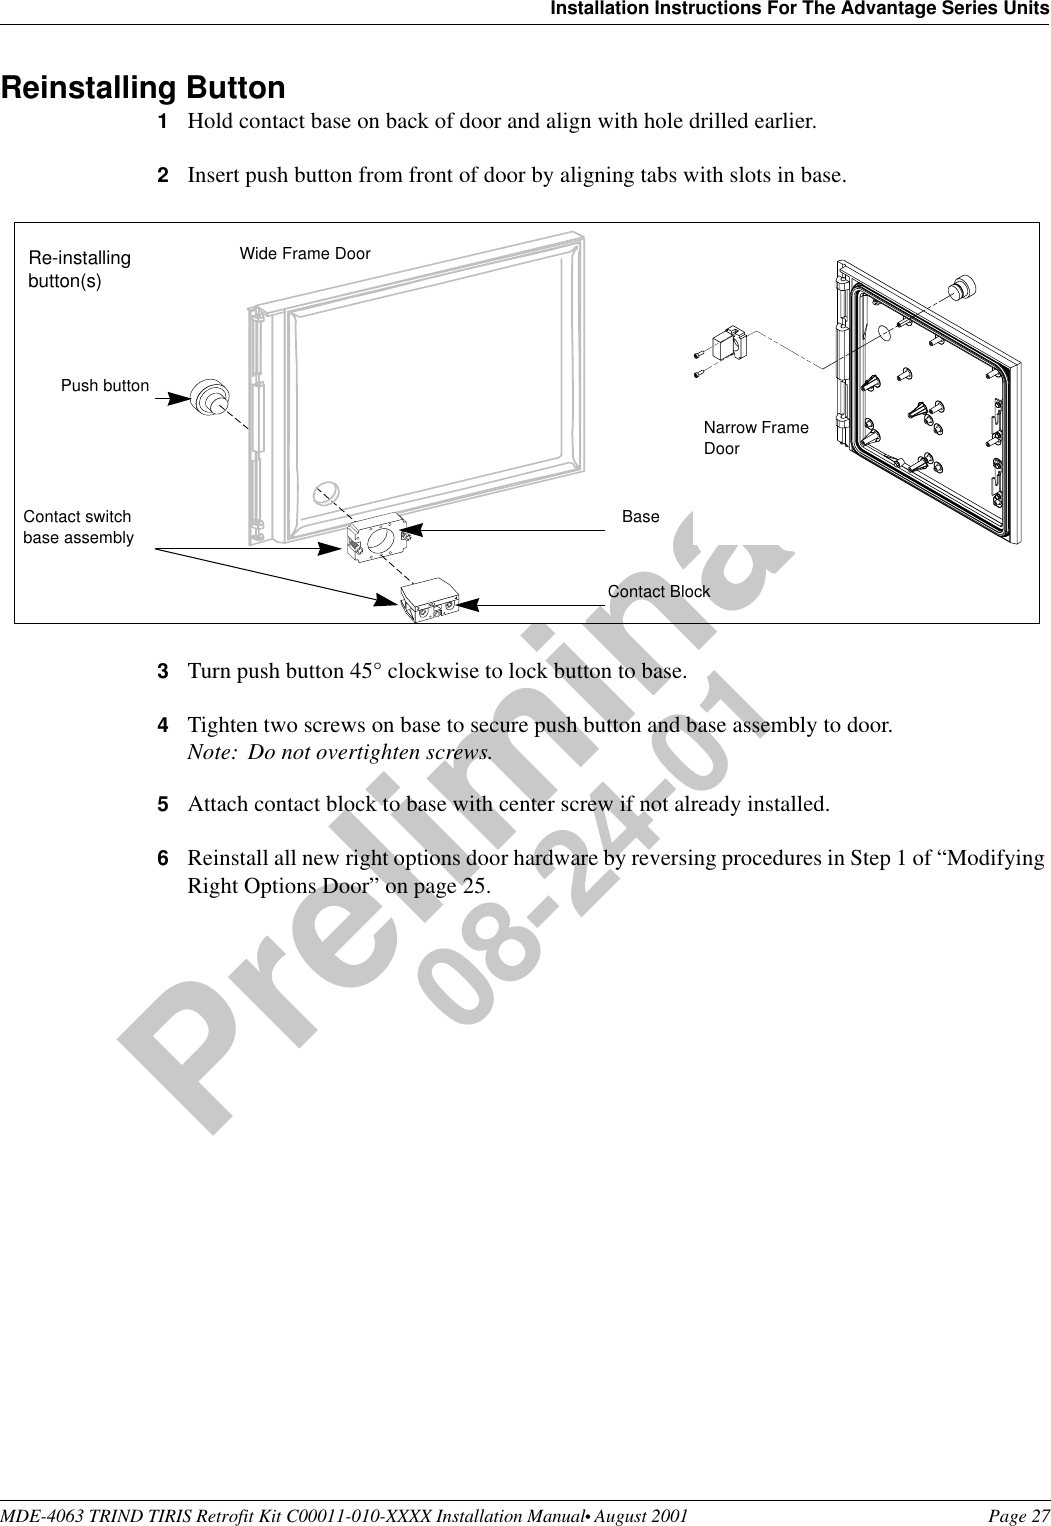 MDE-4063 TRIND TIRIS Retrofit Kit C00011-010-XXXX Installation Manual• August 2001 Page 27Installation Instructions For The Advantage Series UnitsPreliminary08-24-01Reinstalling Button 1Hold contact base on back of door and align with hole drilled earlier.2Insert push button from front of door by aligning tabs with slots in base.3Turn push button 45° clockwise to lock button to base. 4Tighten two screws on base to secure push button and base assembly to door.Note: Do not overtighten screws.5Attach contact block to base with center screw if not already installed.6Reinstall all new right options door hardware by reversing procedures in Step 1 of “Modifying Right Options Door” on page 25.Contact BlockPush button BaseContact switch base assembly Re-installing button(s)Wide Frame DoorNarrow Frame Door